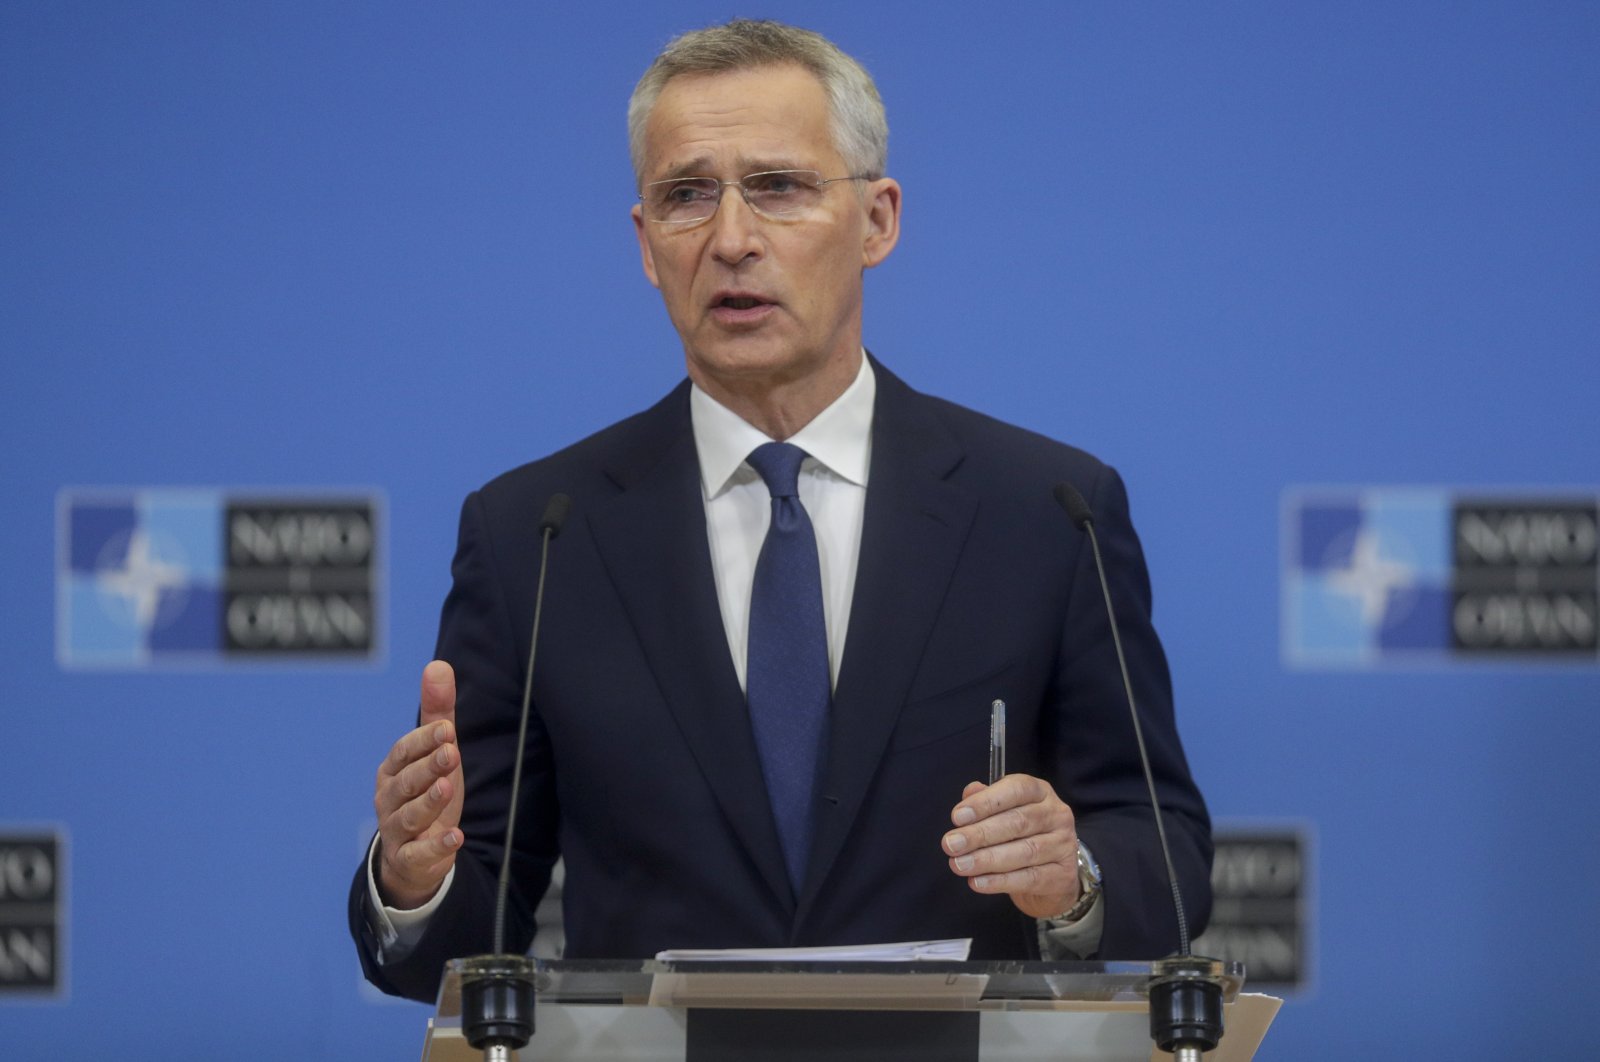 NATO Secretary-General Jens Stoltenberg presents the annual report 2021 of the Alliance during a press conference in Brussels, Belgium, March 31, 2022.  (EPA Photo)